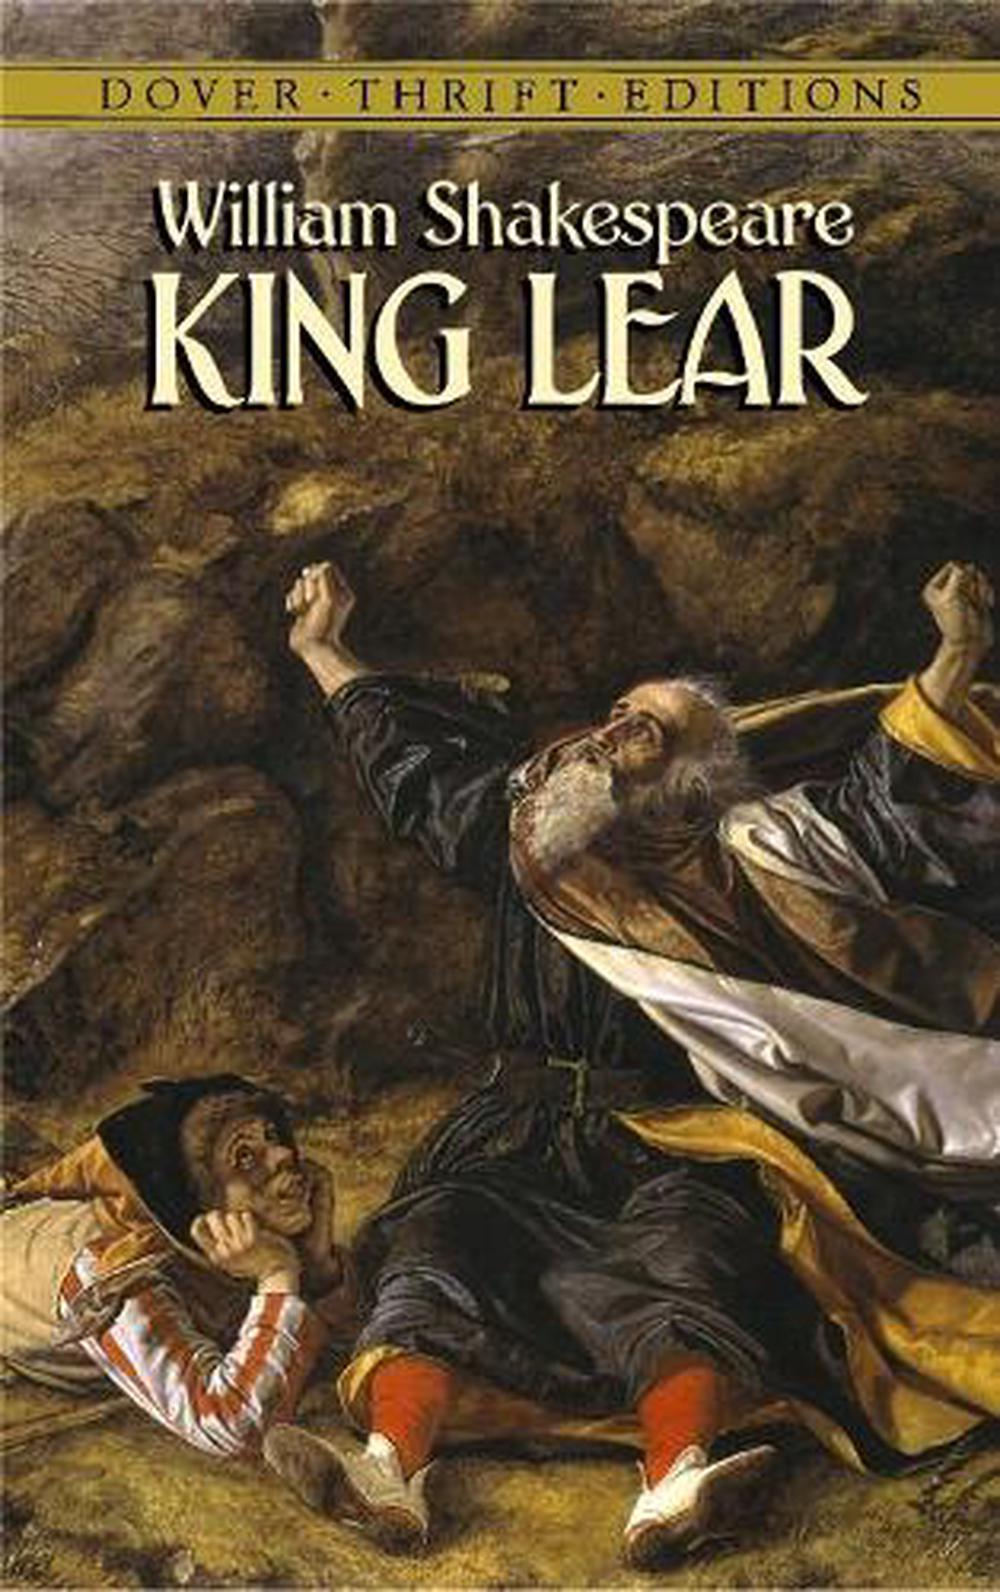 the king lear by william shakespeare